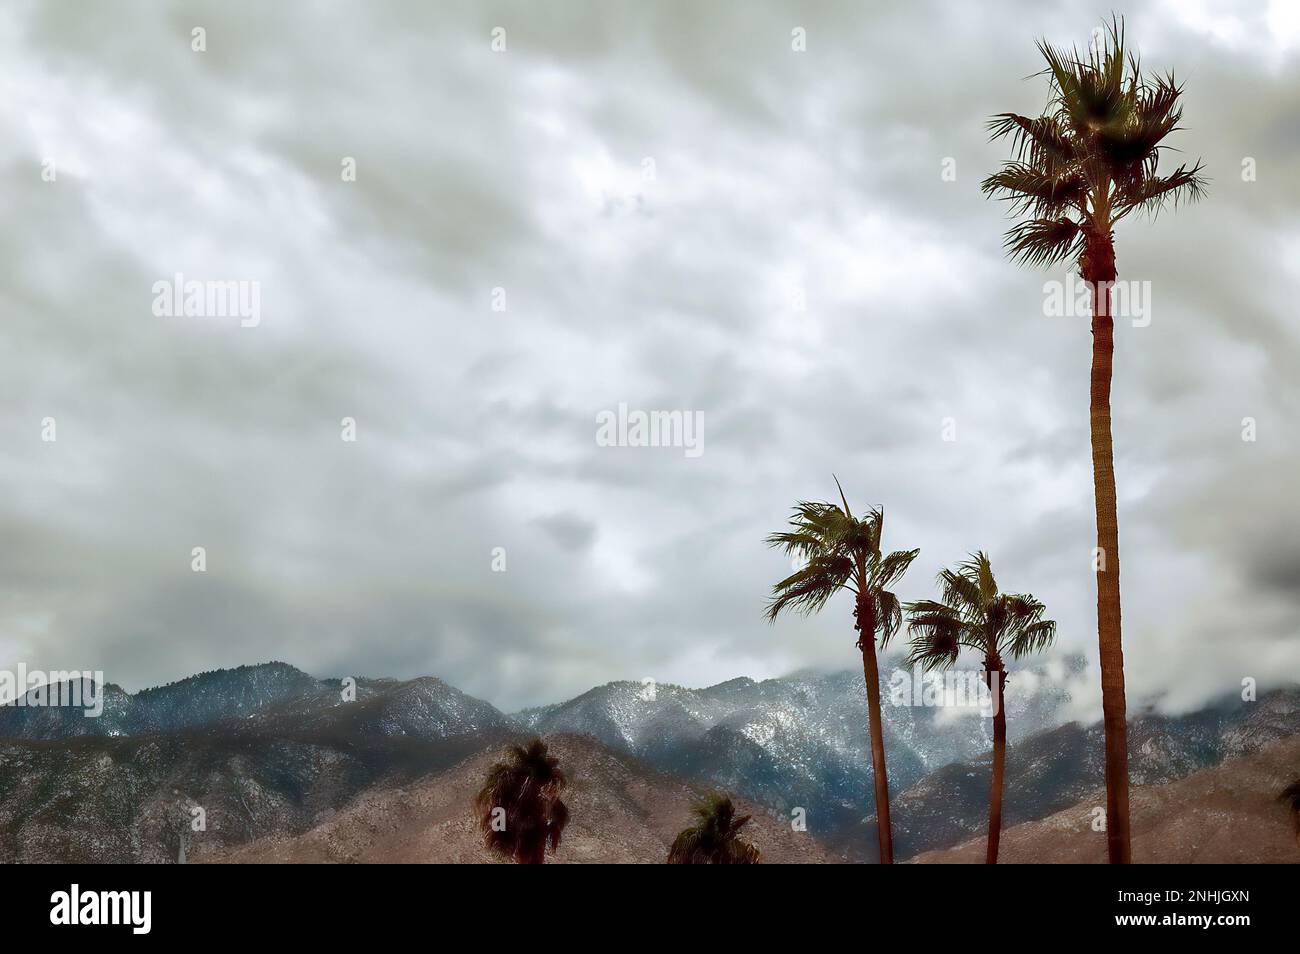 During the winter, it's not uncommon for fascinating clouds from the north to envelop Palm Springs. Stock Photo